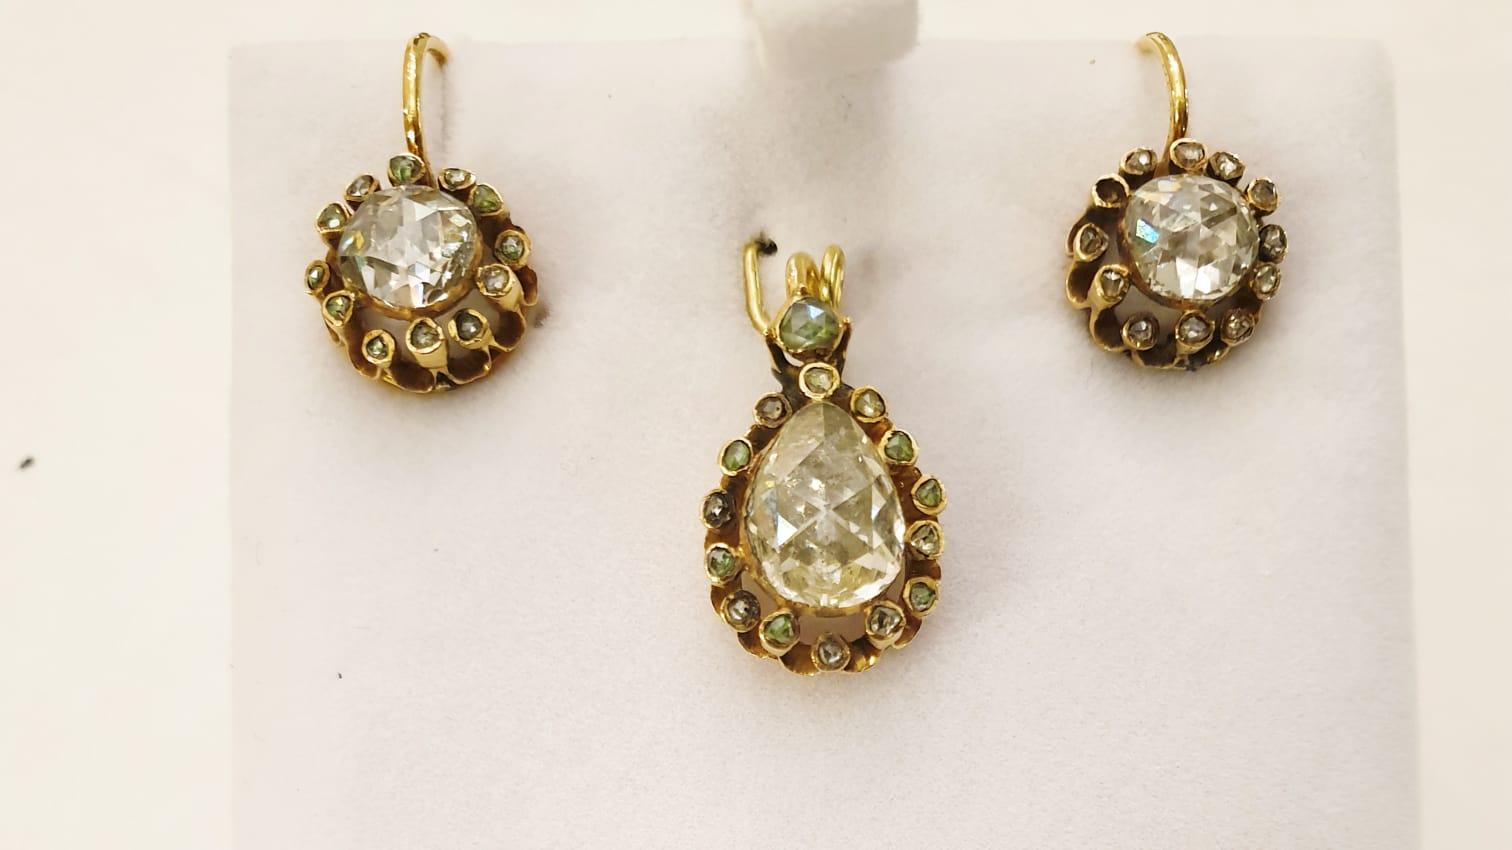 Antique rose cut diamond set of earrings and pendant in large stones earrings messurments 7mm diameter and pendant central diamond diameter is 9mm×7mm and 17mm pendant length in full facets excellent spark back foiled old technique and 10k gold